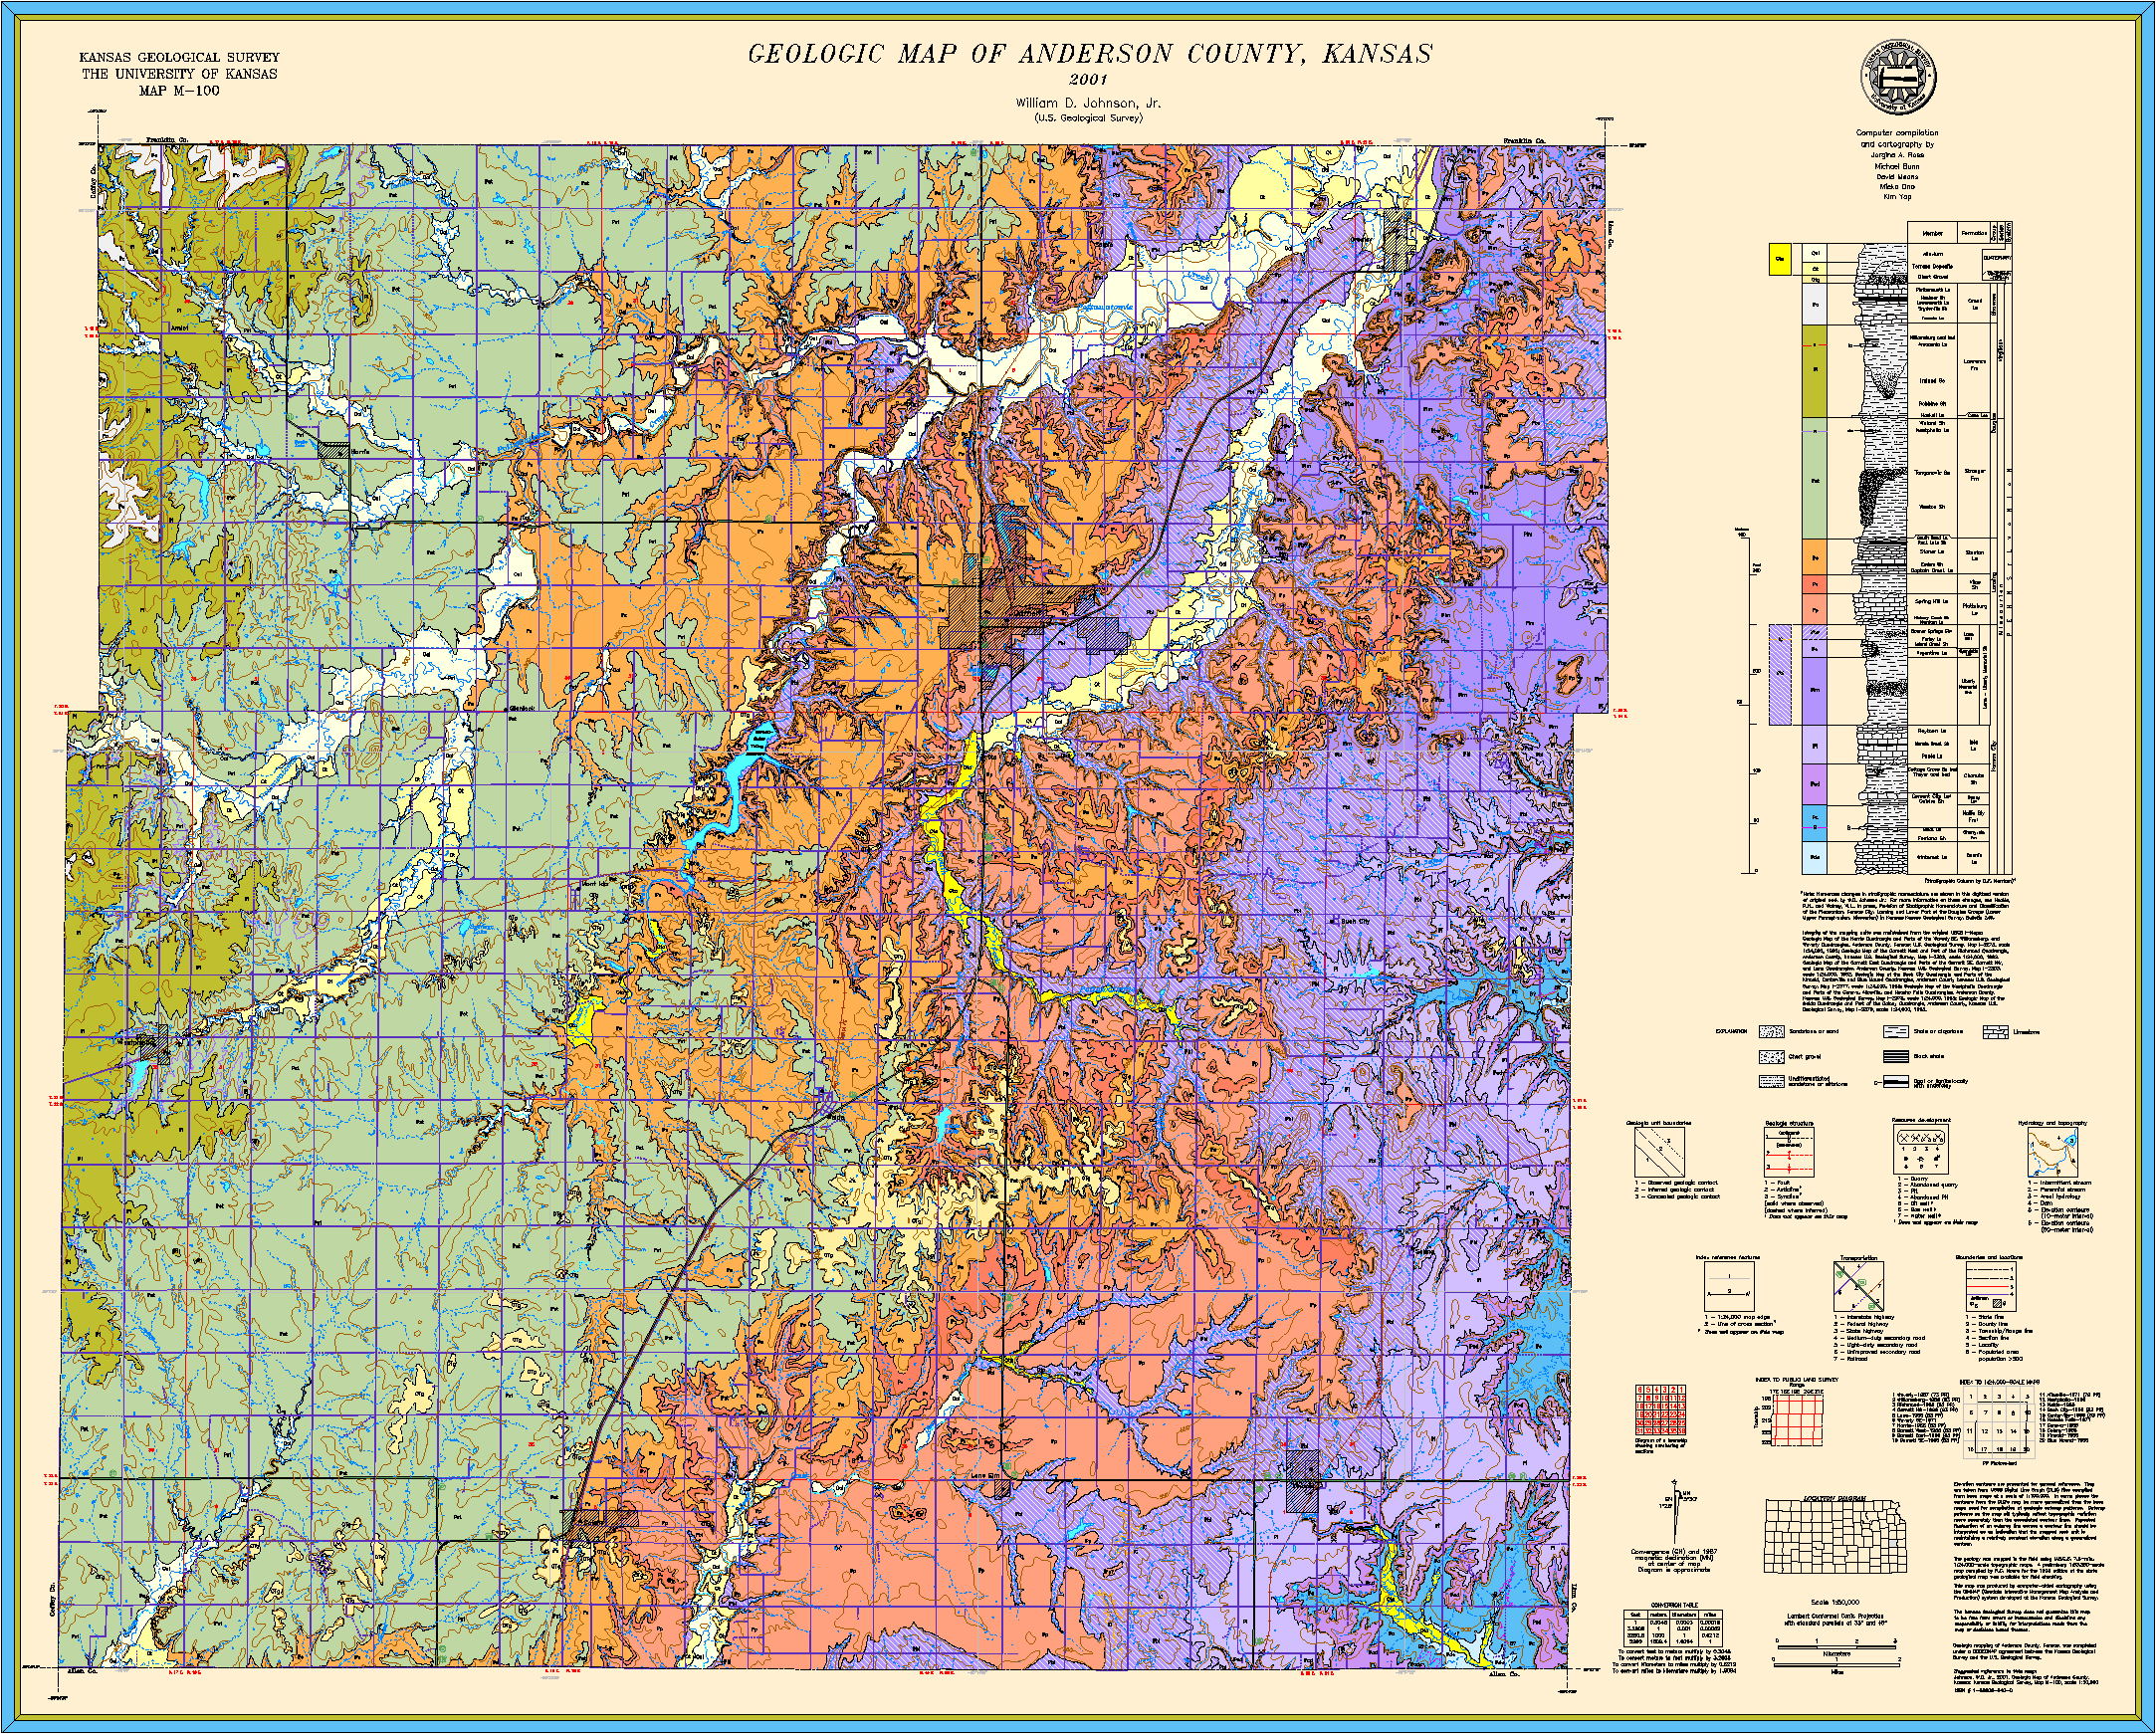 Anderson County geologic map